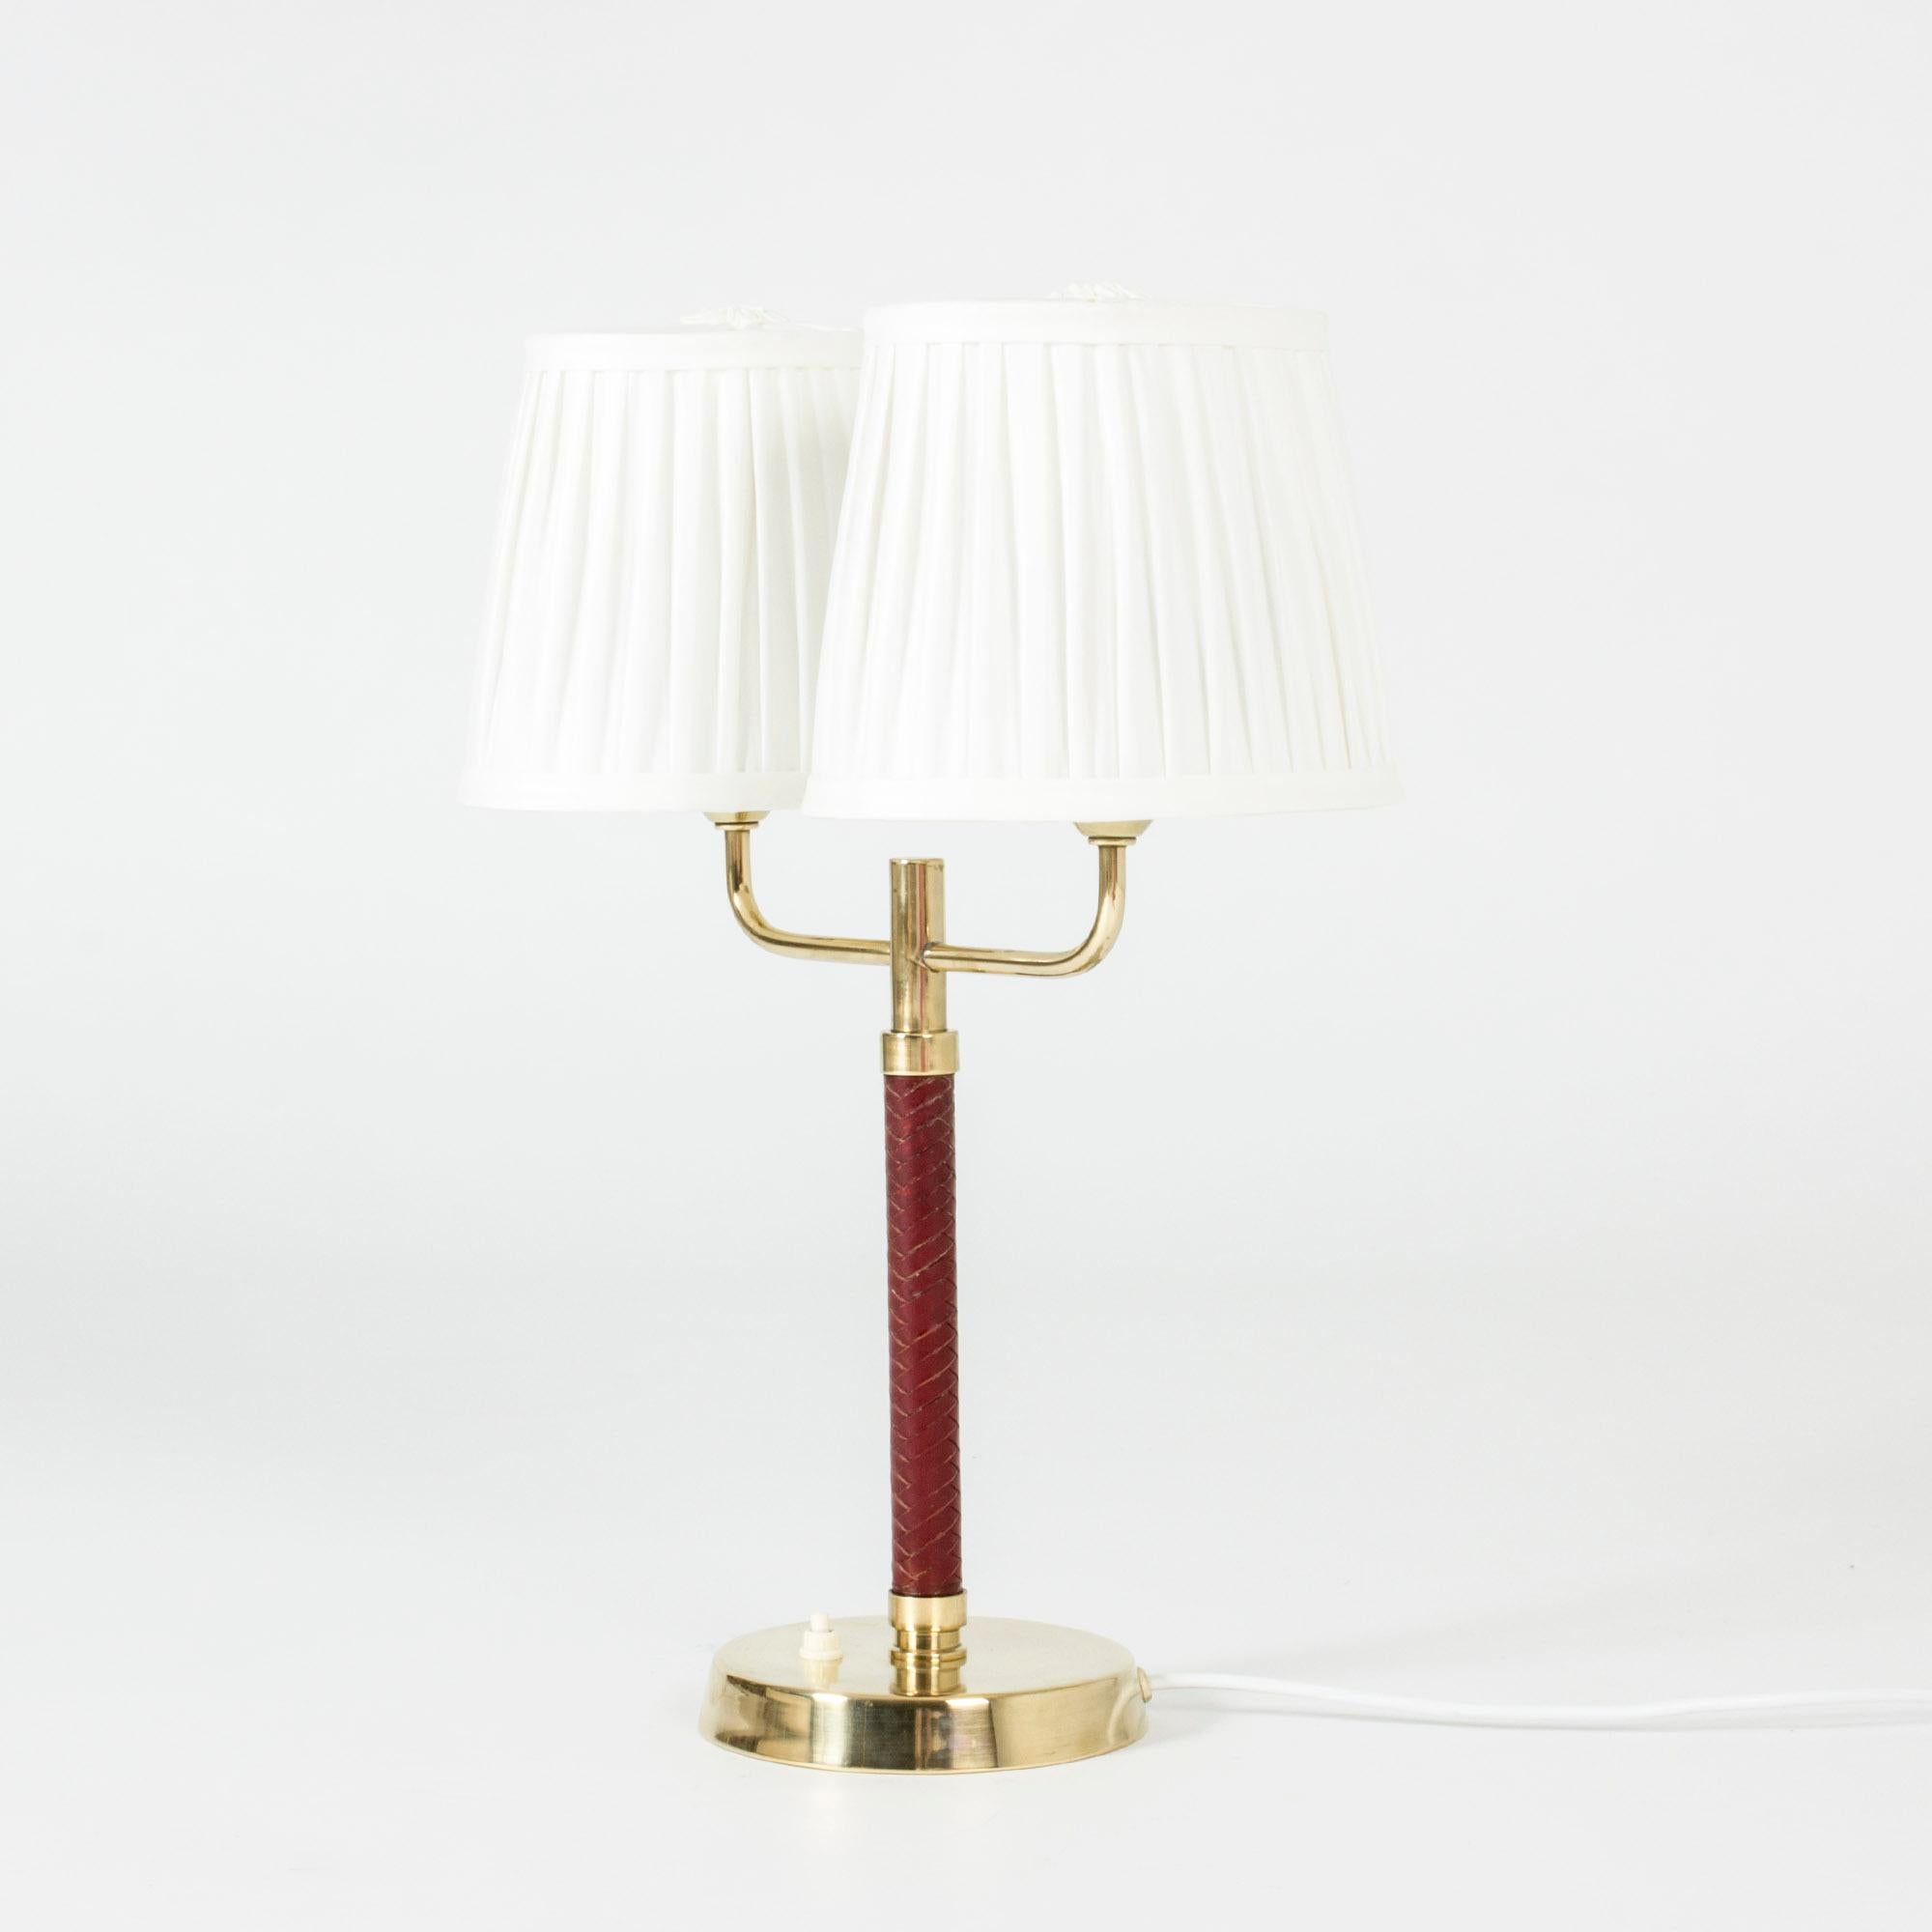 Elegant table lamp from Karlskrona Lampfabrik, made from brass with an oxblood red wreathed leather handle. Double lampshades made from pleated white fabric.